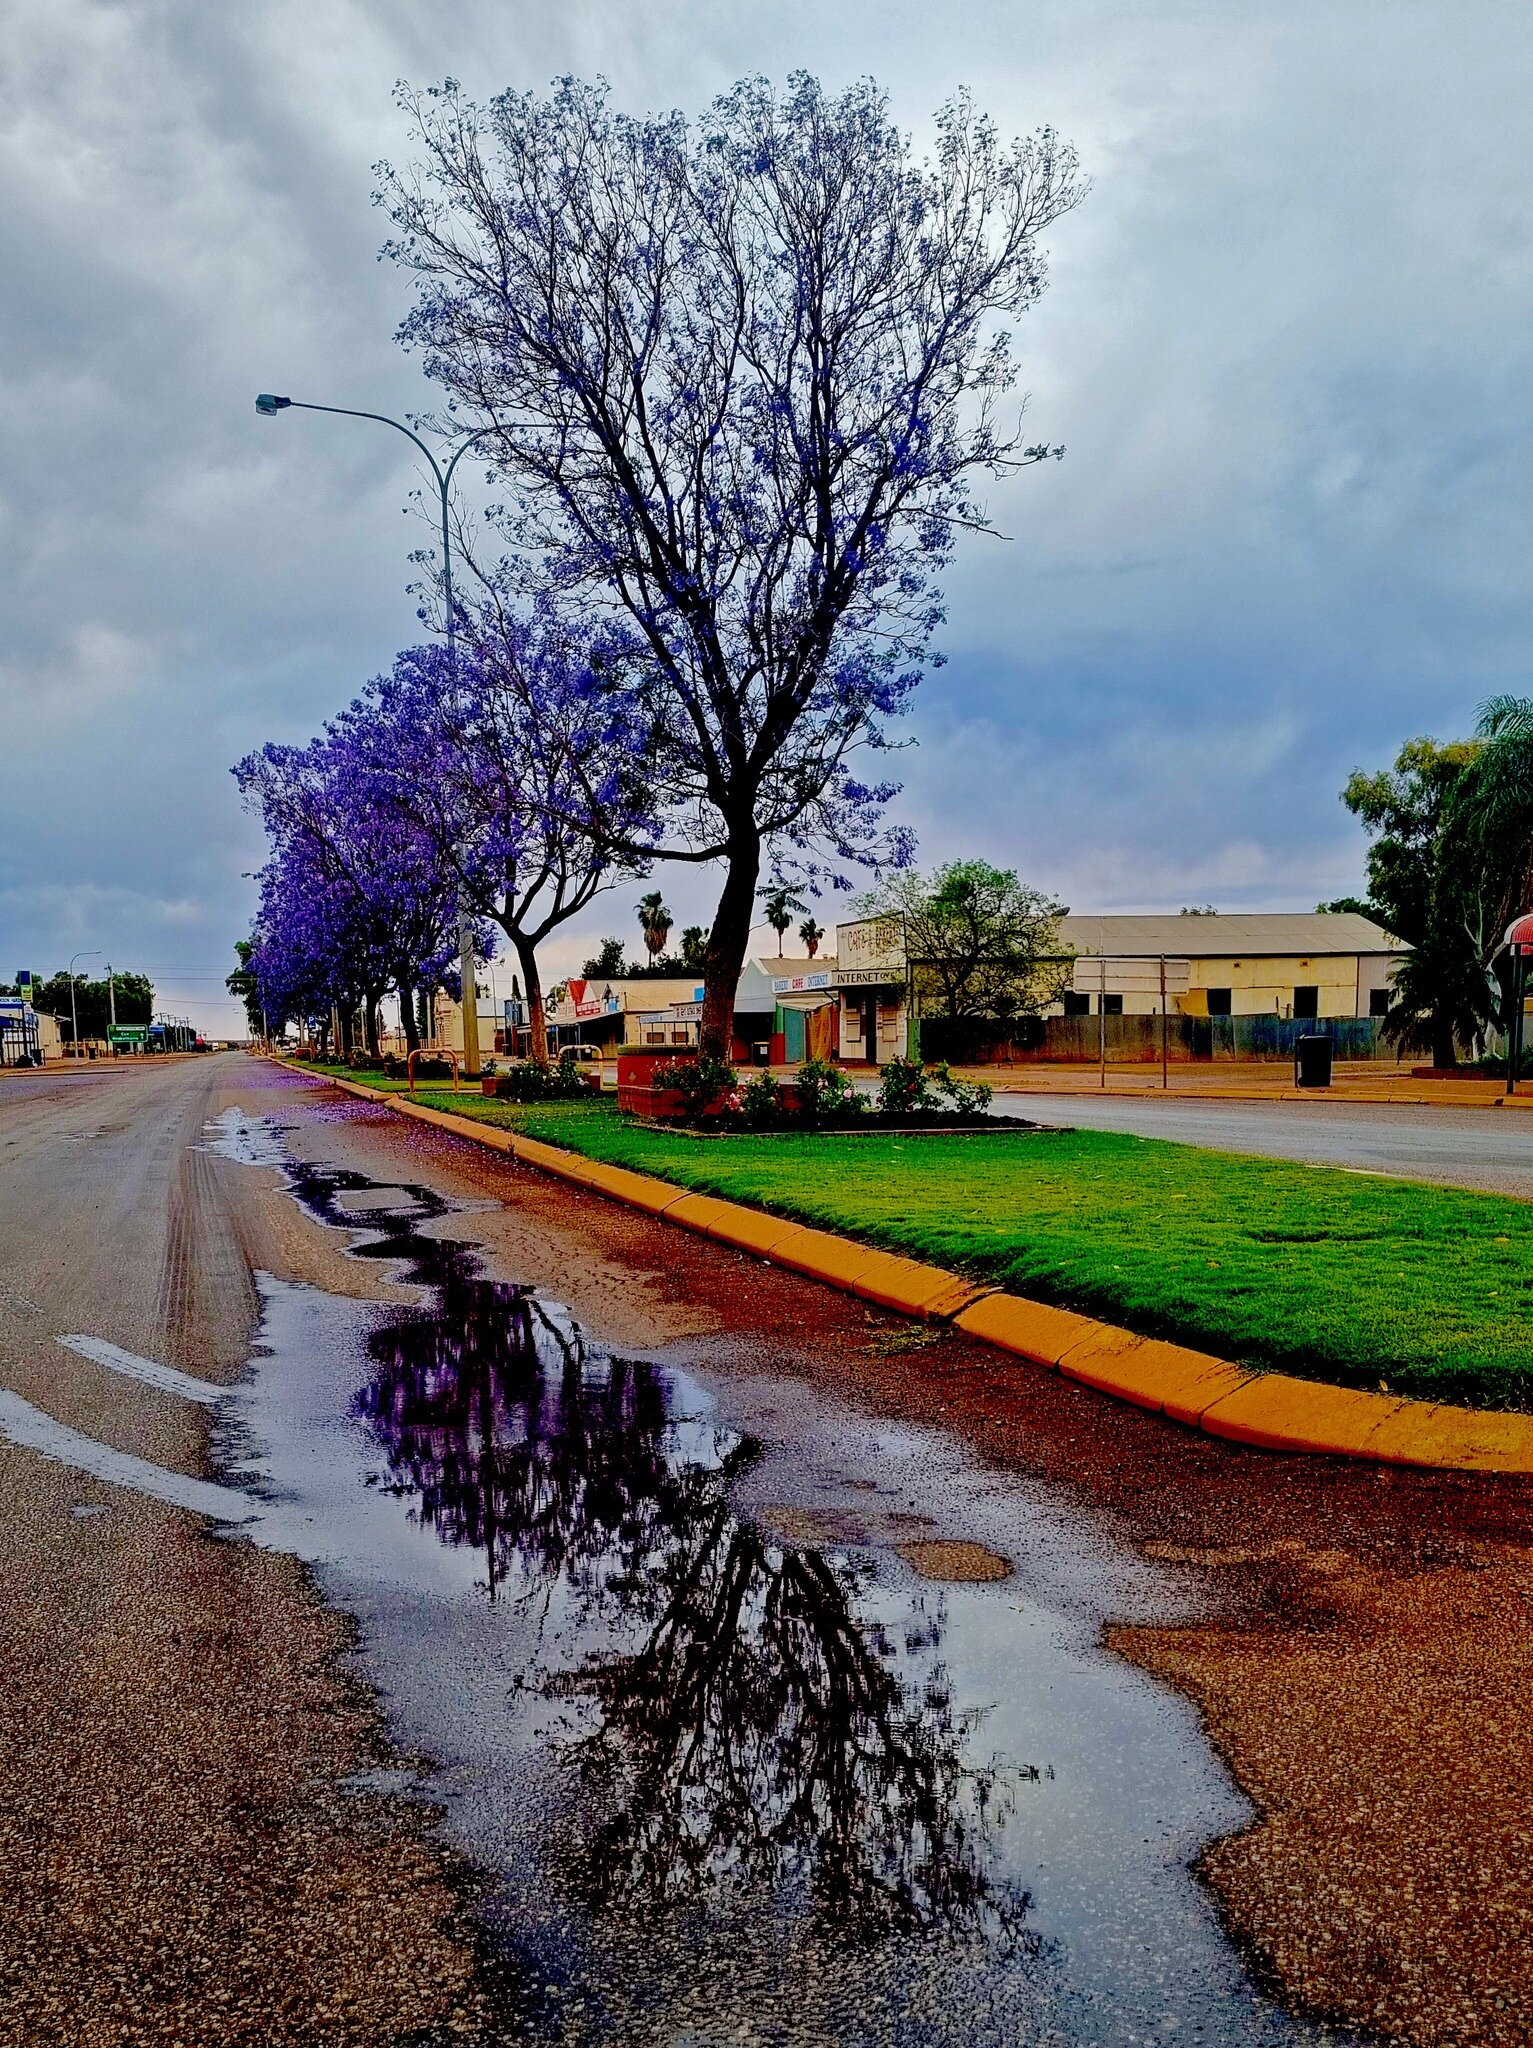 A real spring in Mount Magnet with our stunning jacarandas and the light shower from overnight that broke the back of that hot spell - it's no wonder we love this place so much. 😍